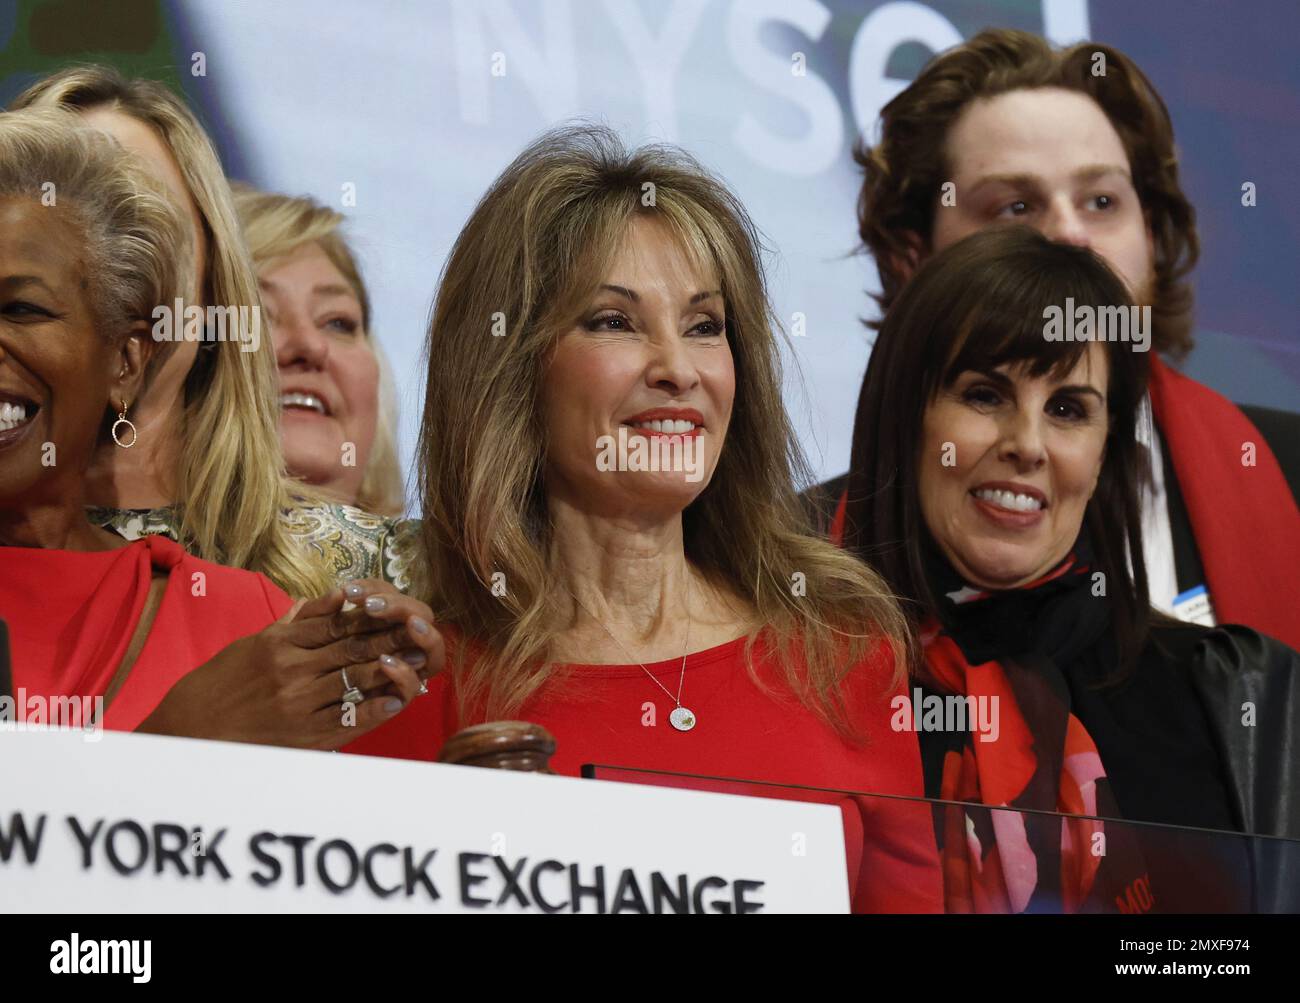 New York, United States. 02nd Feb, 2023. Susan Lucci joins representatives of the American Heart Association when they ring the Opening Bell at the New York Stock Exchange on Wall Street in New York City on Friday, February 3, 2023. A jobs report showed that the US economy added 517,000 jobs in January. Photo by John Angelillo/UPI Credit: UPI/Alamy Live News Stock Photo